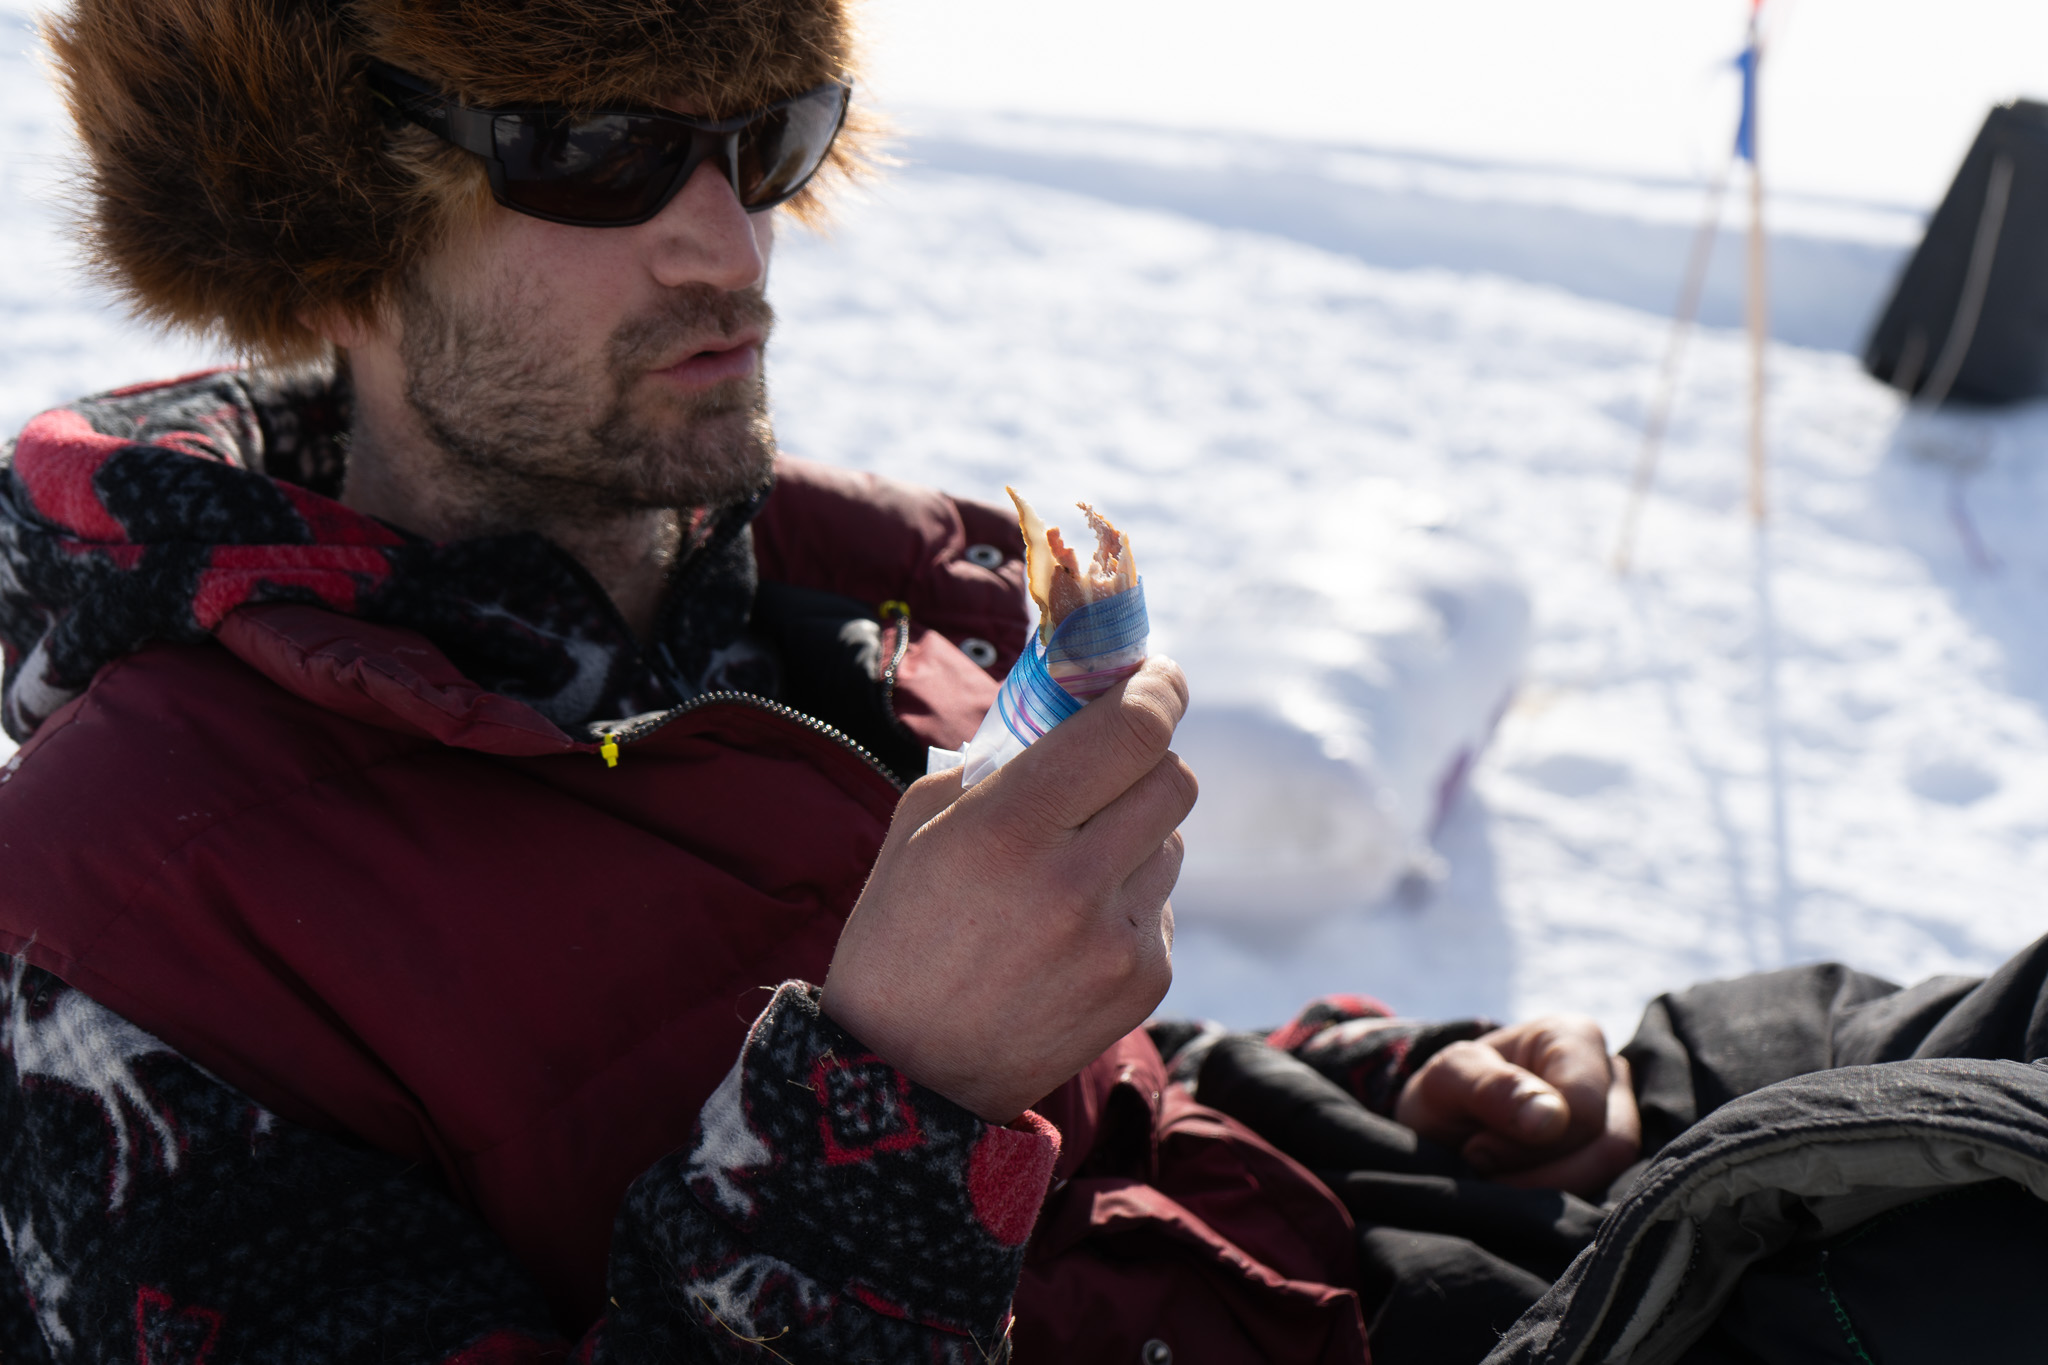 A musher sits on a sled munching bacon from a ziploc bag